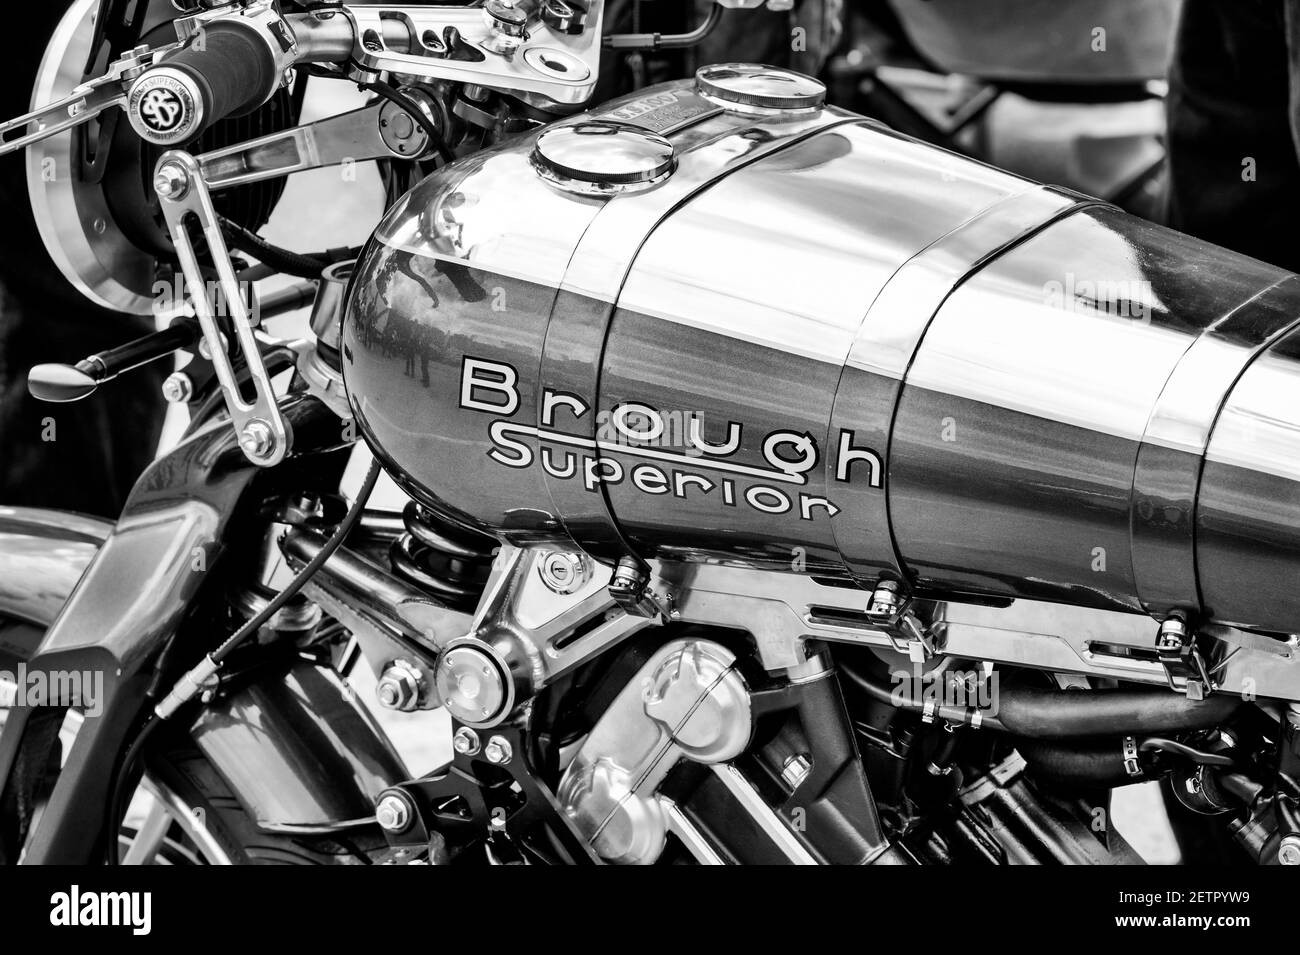 2016 Brough Superior SS100 Motorcycle. Classic British Motorcycle. Black and white Stock Photo